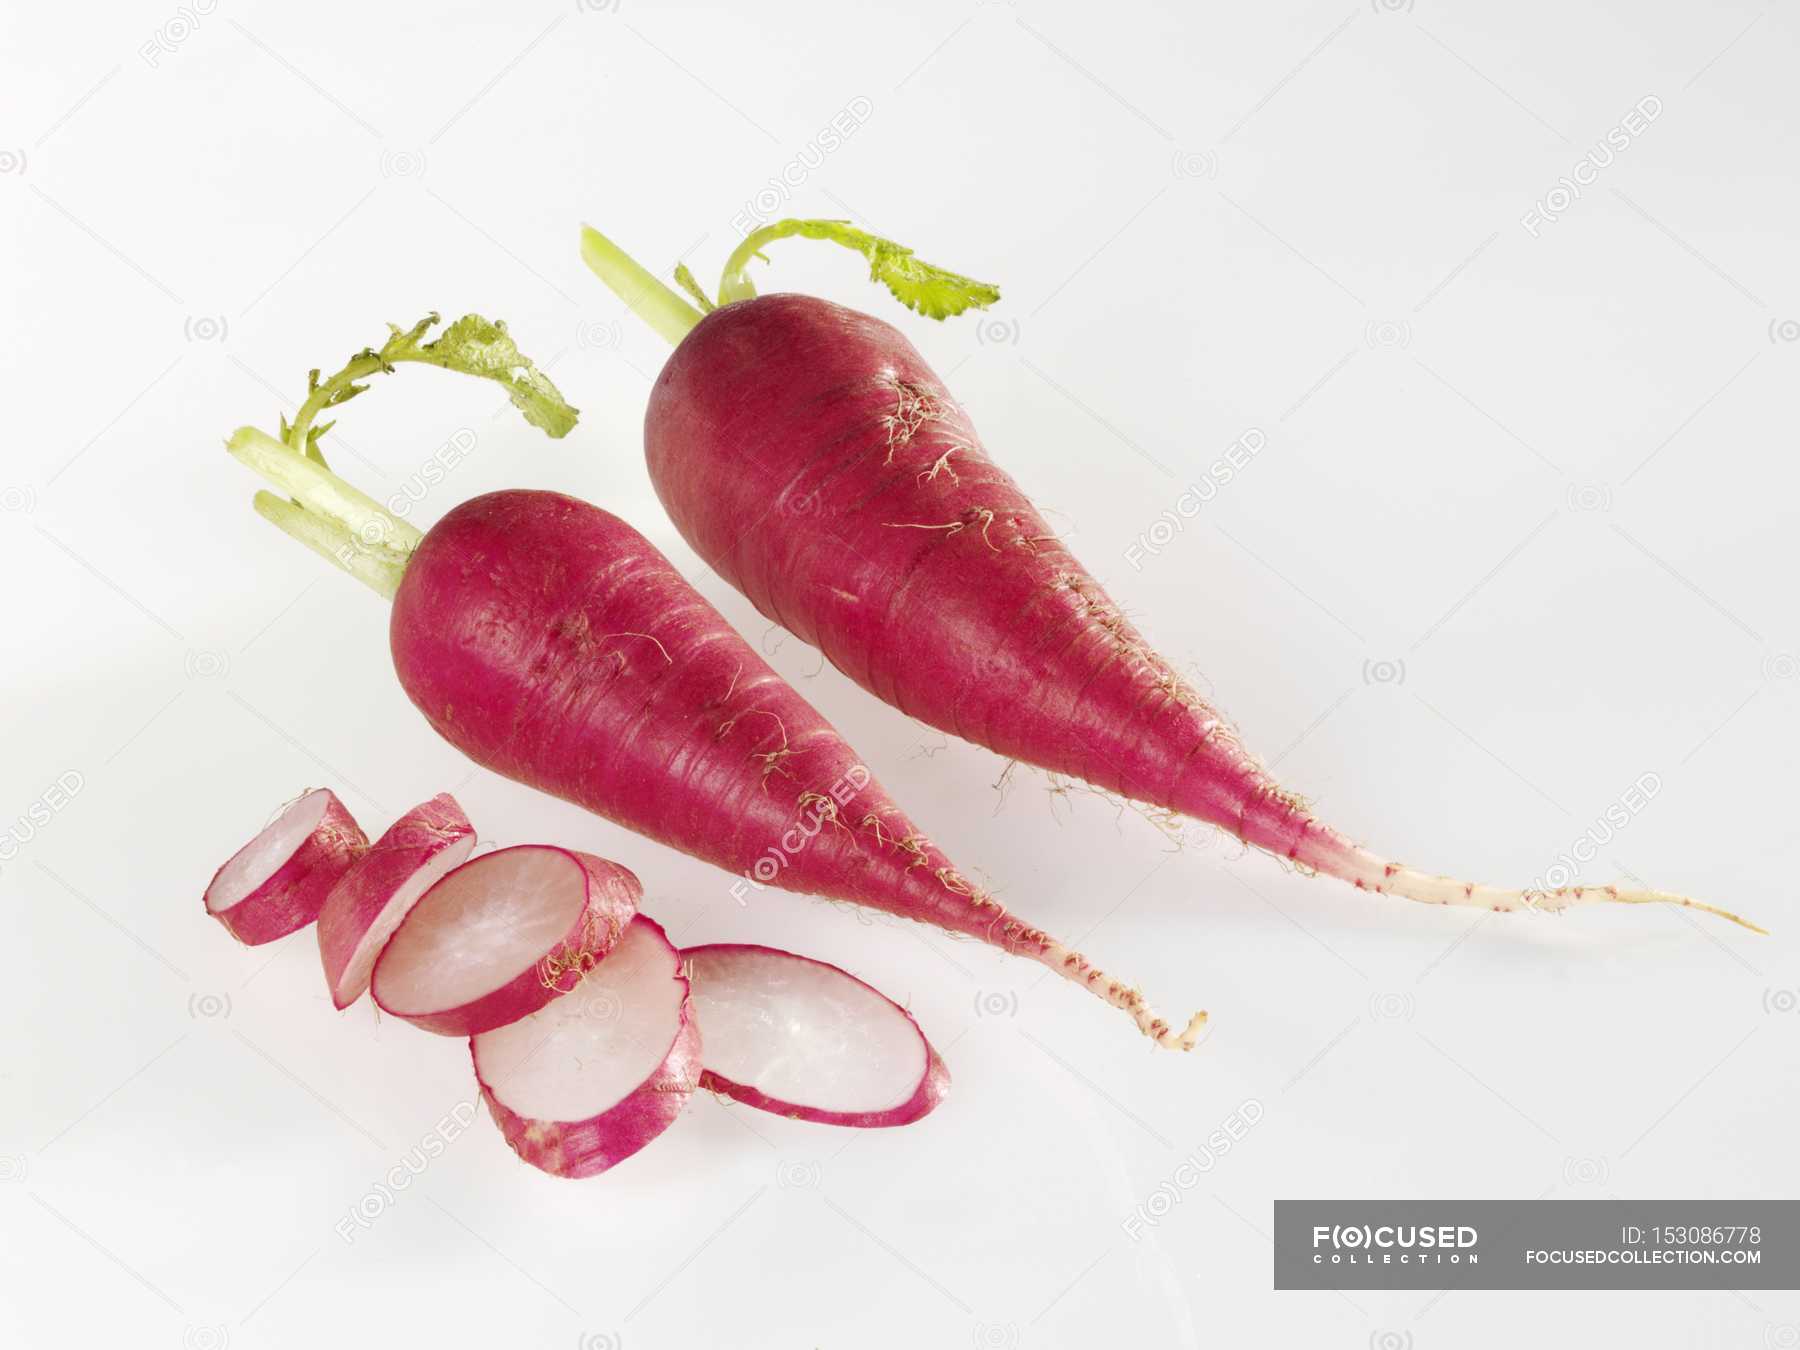 Red radishes with slices — sliced, healthy food - Stock Photo | #153086778